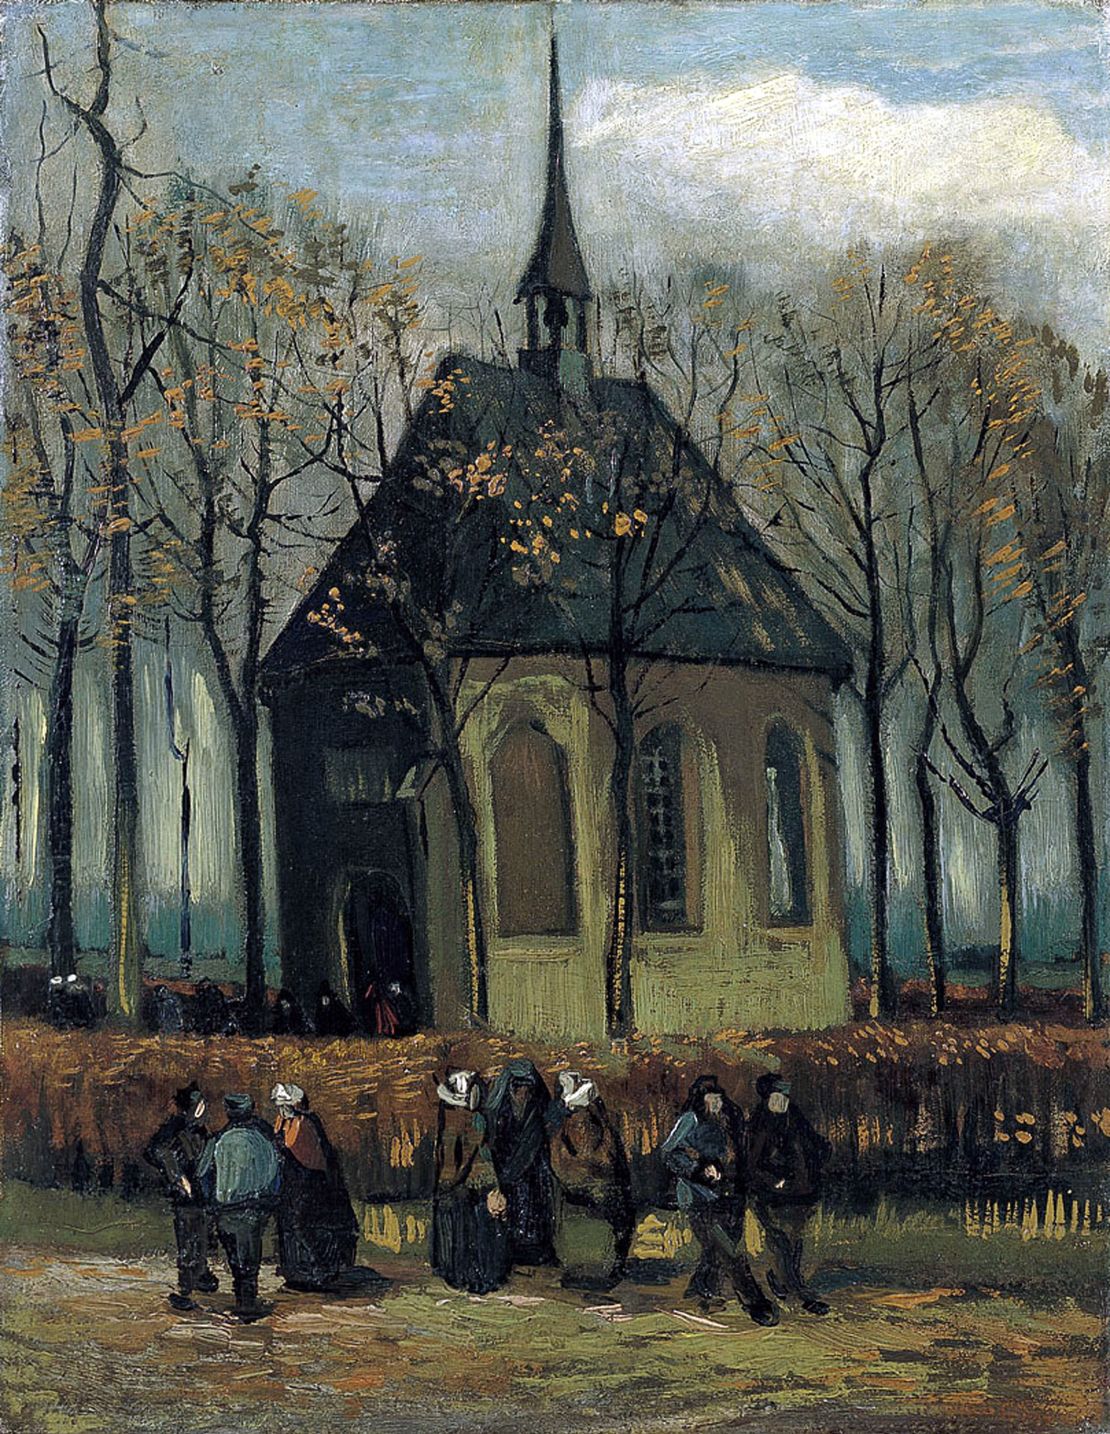 'Congregation Leaving the Reformed Church in Nuenen' was found without its frame, and with minor damage.